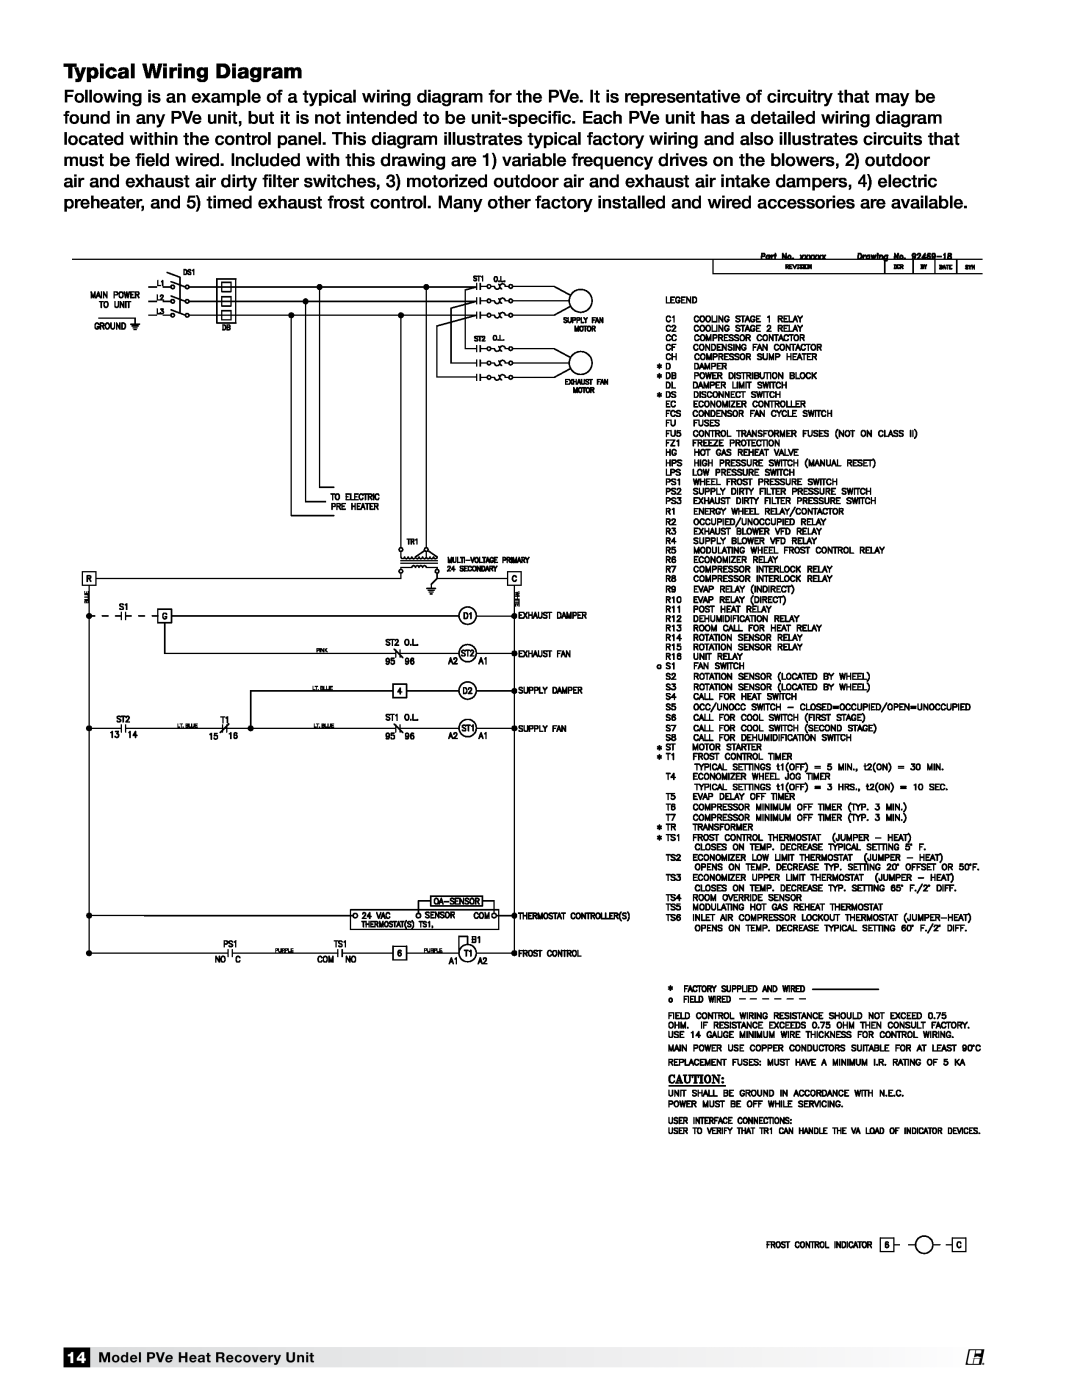 Greenheck Fan PVE-20, PVE-55, PVE-35, PVE-45 manual Typical Wiring Diagram, Model PVe Heat Recovery Unit 